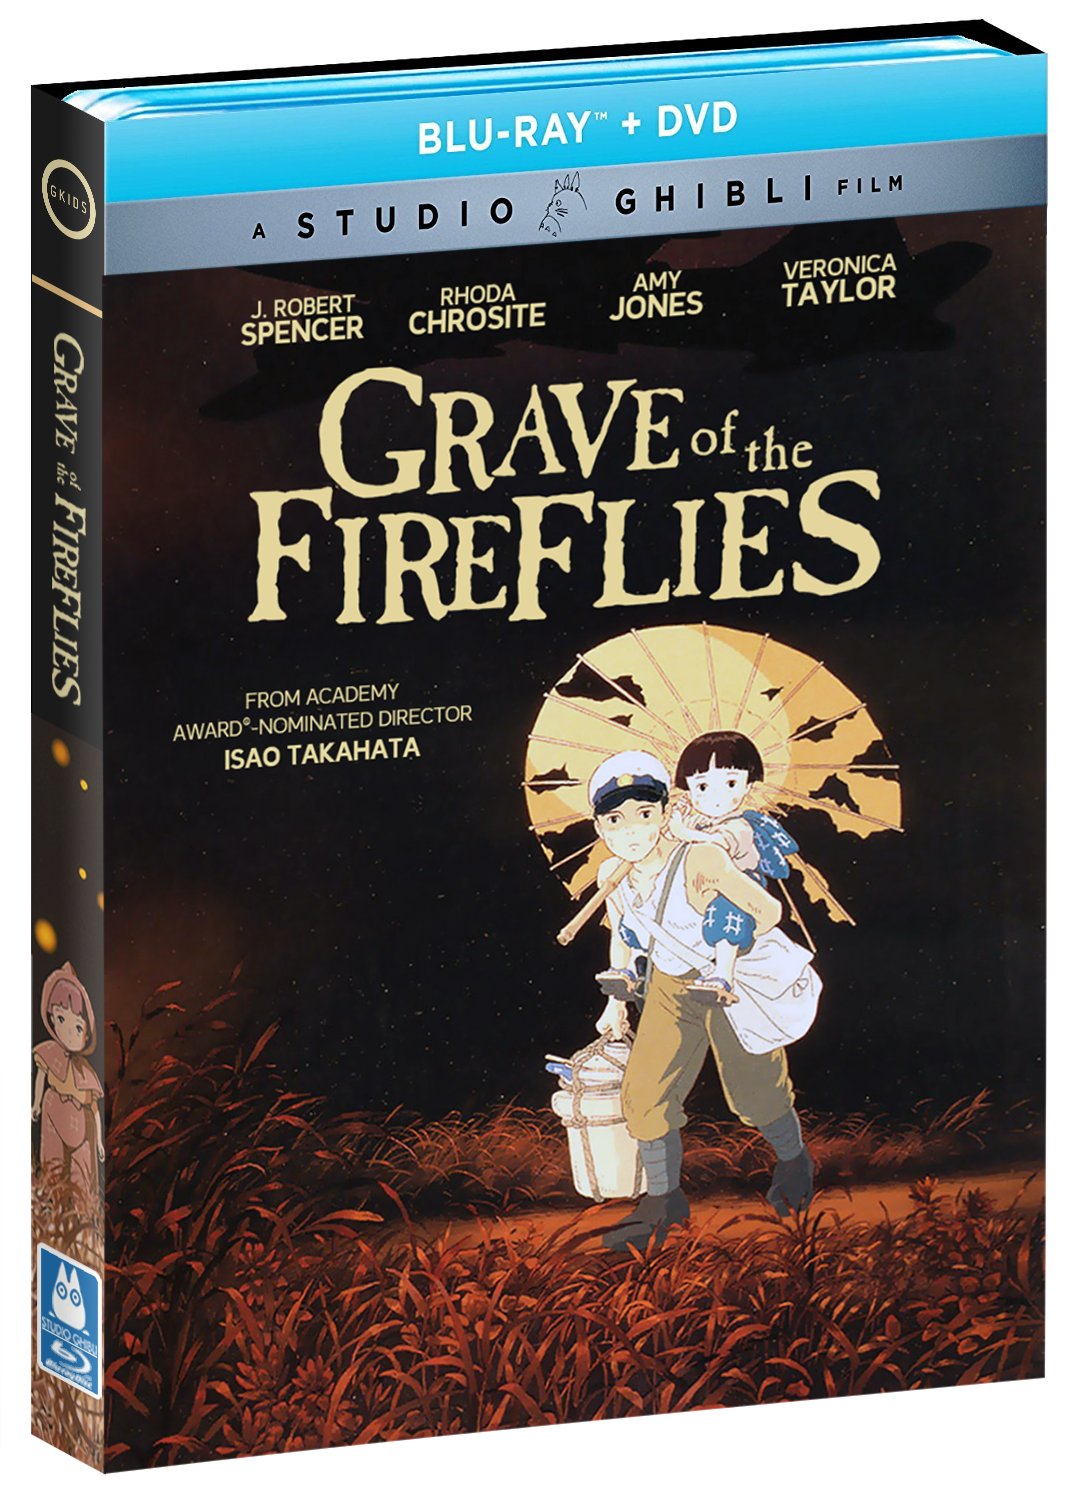 GKIDS Picks Up 'Grave of the Fireflies